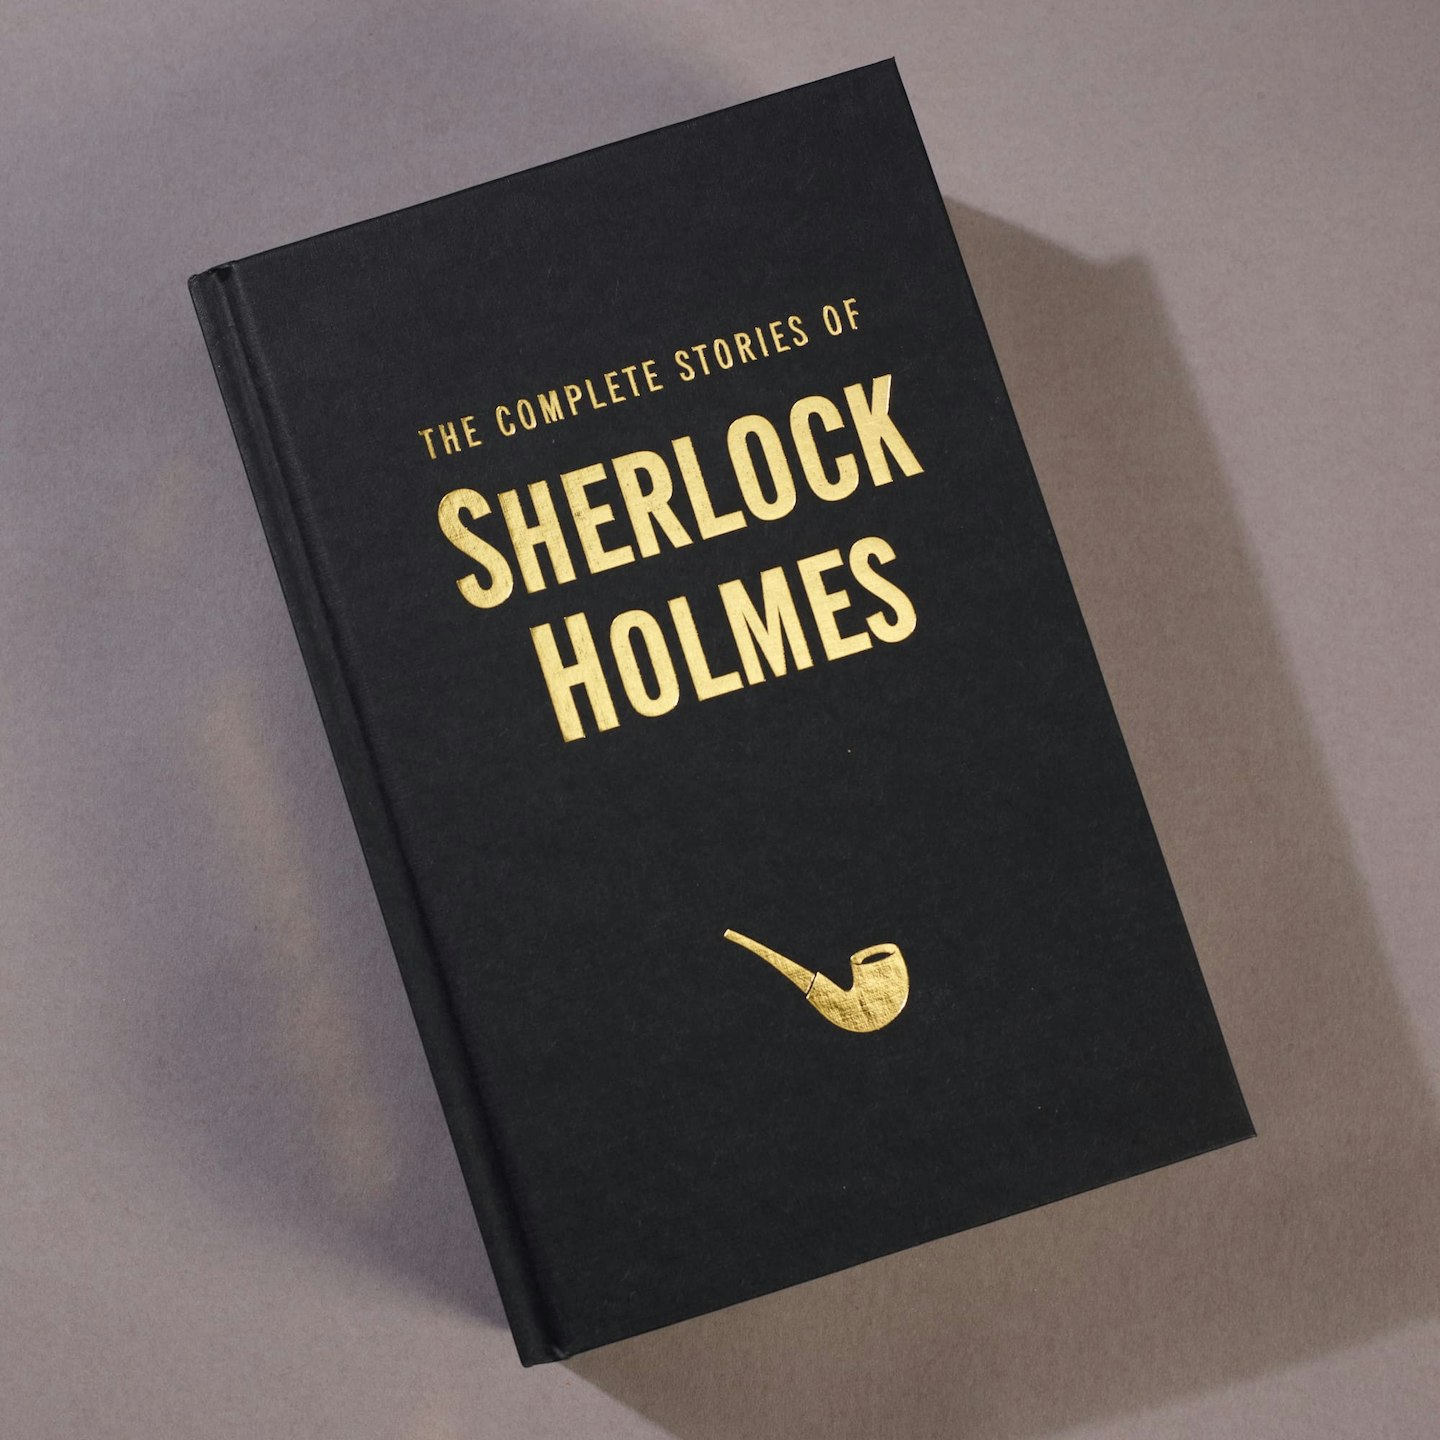 The Complete Sherlock Holmes Collection book